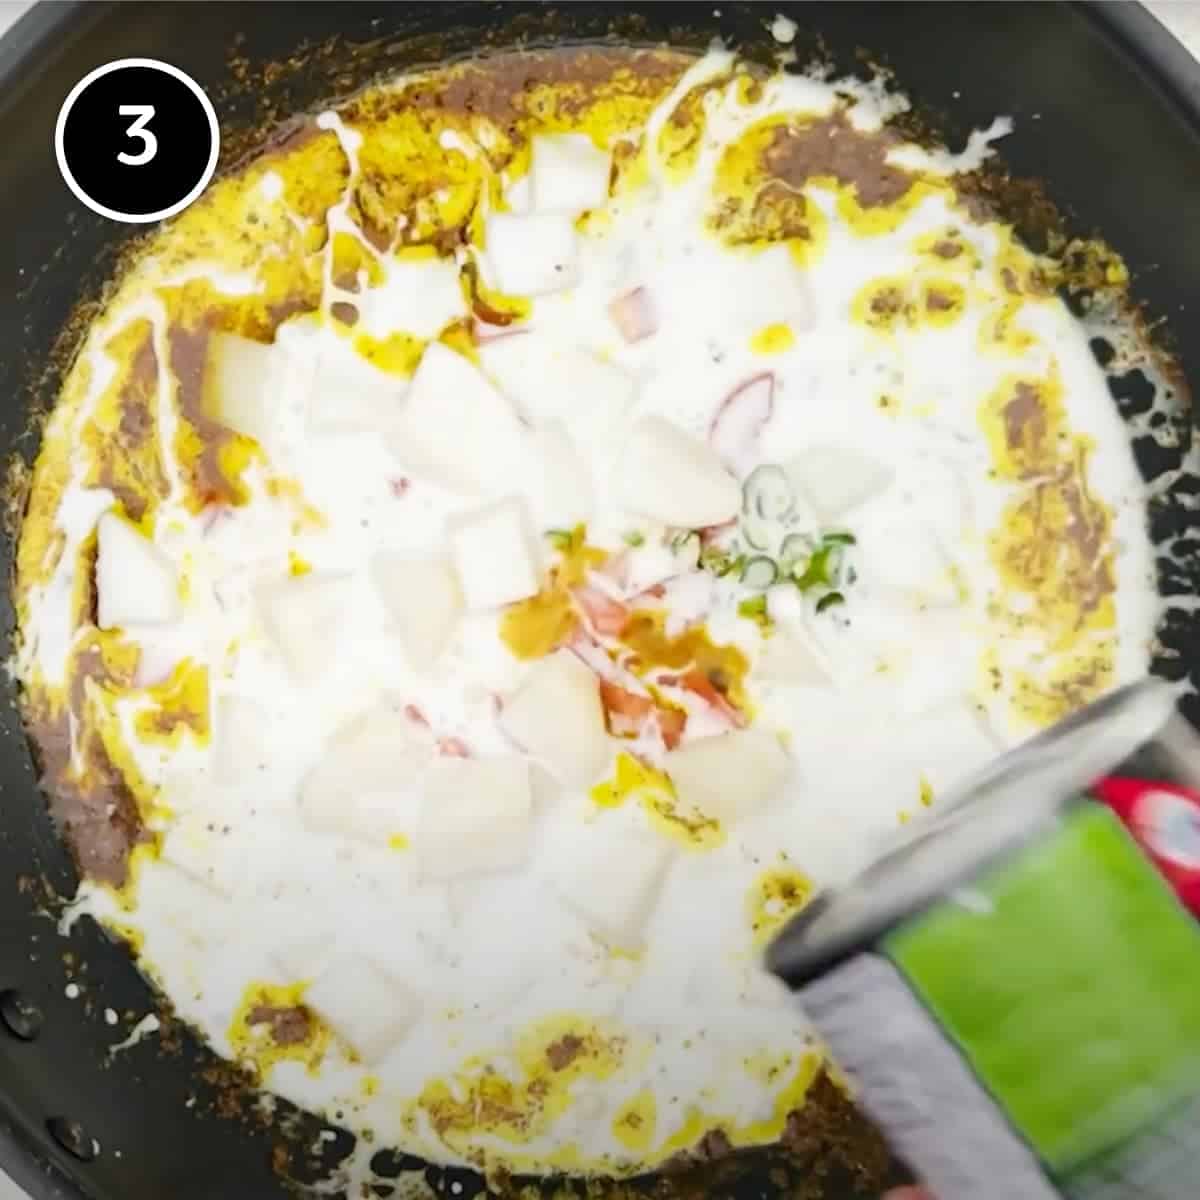 potatoes, tomatoes and coconut milk in a spice paste being cooked for a fish curry | cookeatworld.com